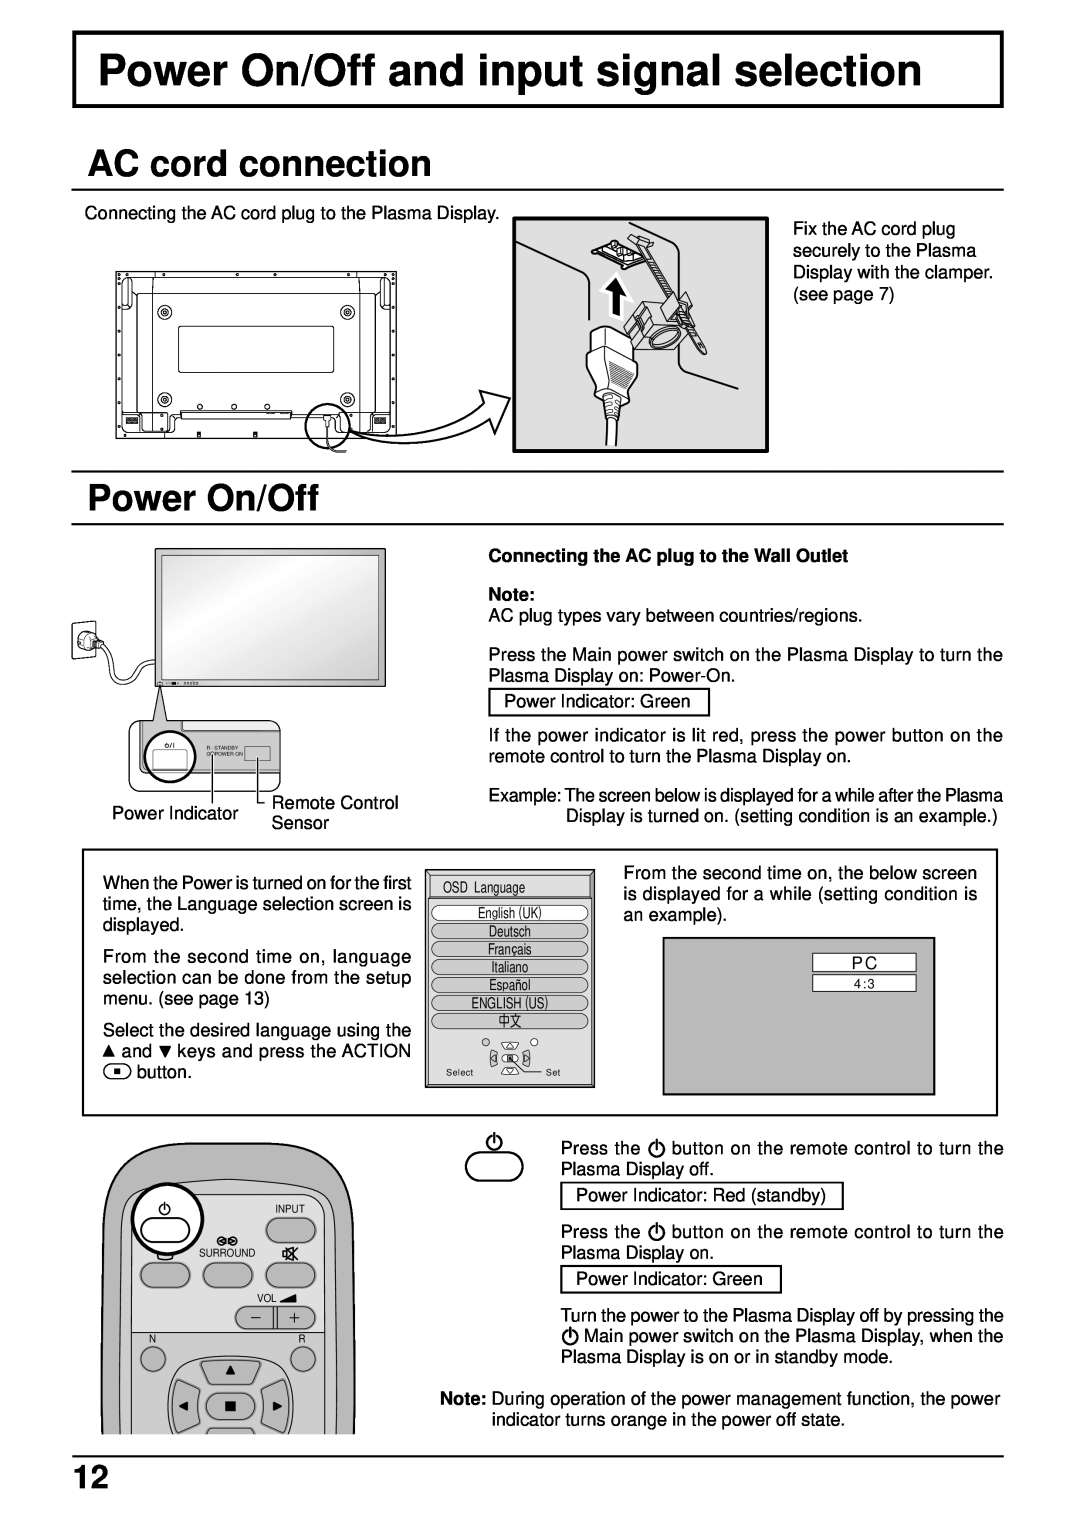 JVC GD-V502PCE manual Power On/Off and input signal selection, AC cord connection 